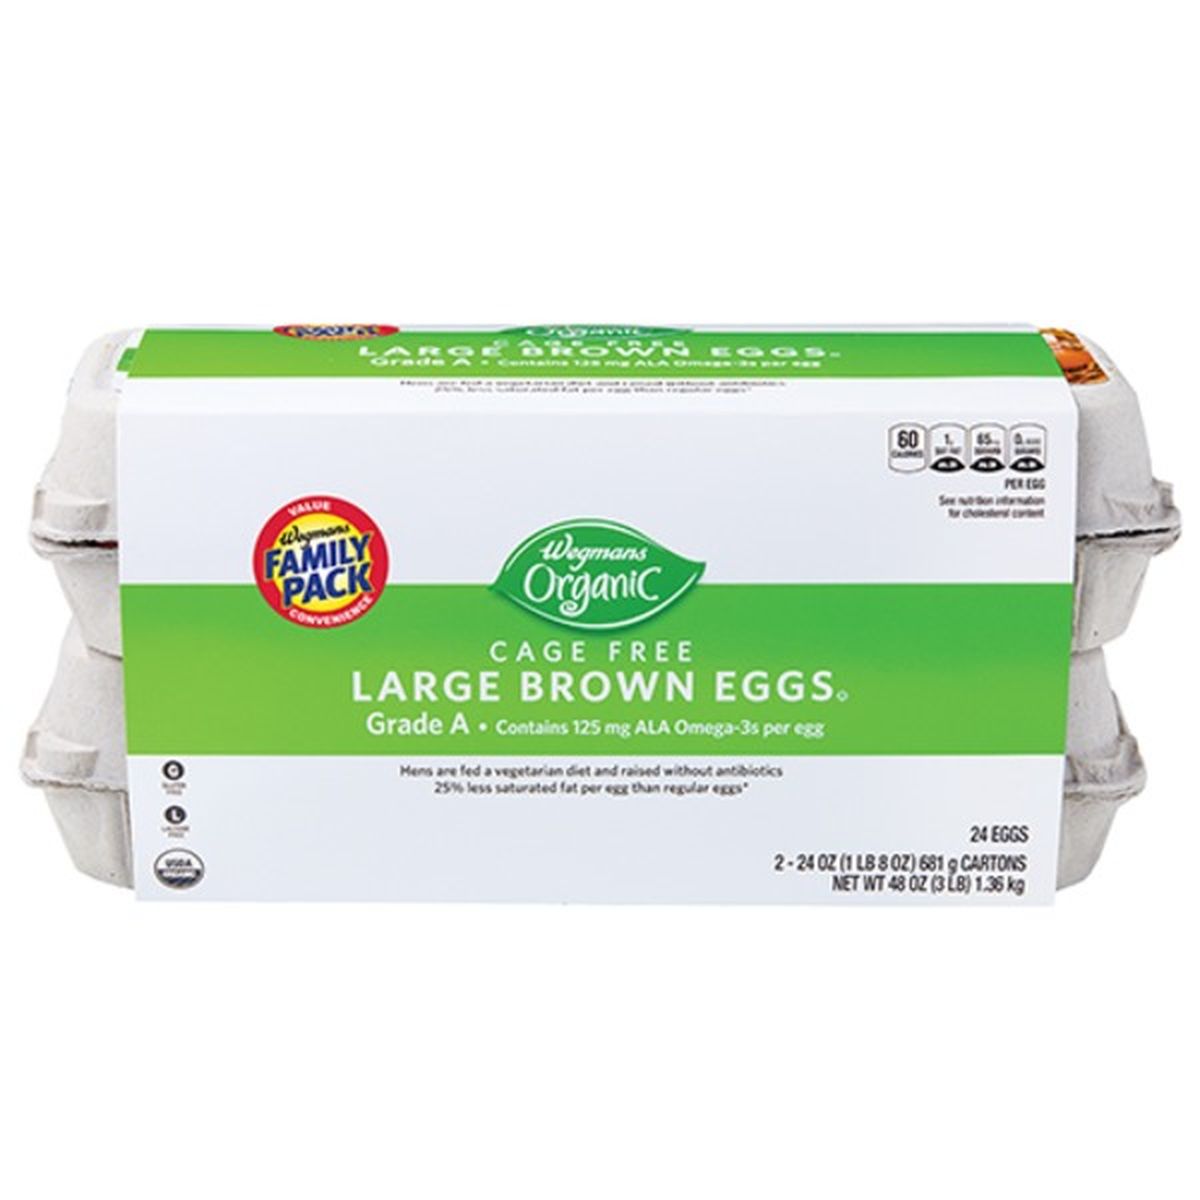 Calories in Wegmans Organic Large Brown Eggs, 24 Count, Cage Free, FAMILY PACK